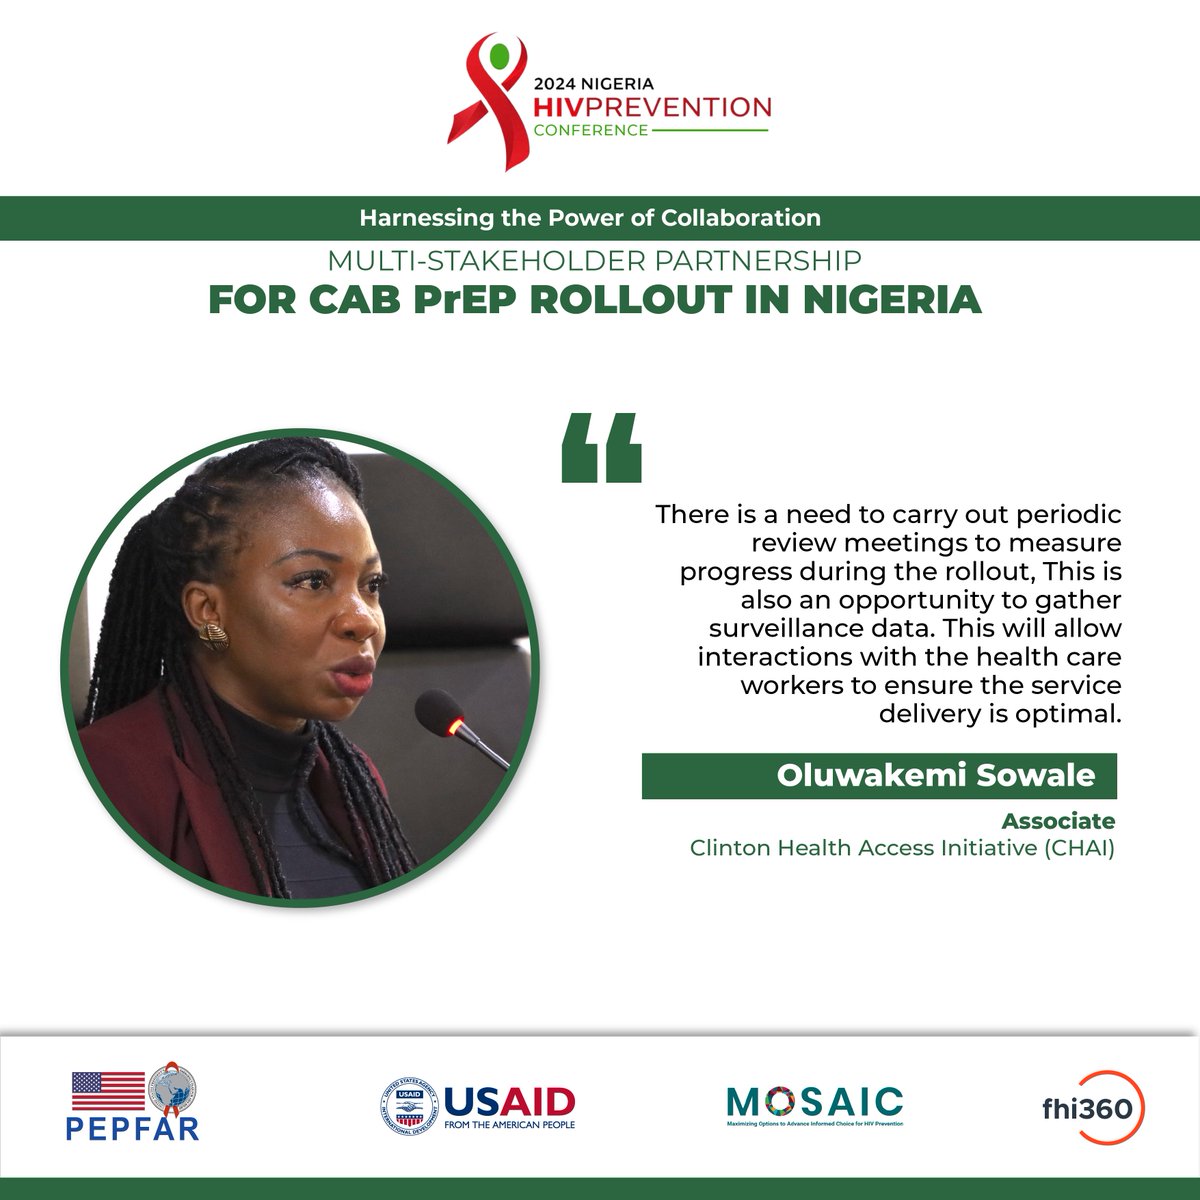 There is a need to carry out periodic review meetings to measure progress during the rollout, This is also an opportunity to gather surveillance data. 

#HIVPrevention #MOSAIC #USAID #NHIVYPC2024 #fhi360nigeria
#HIVPreventionConference24
#BeAChangeAgent #InsideNigeria